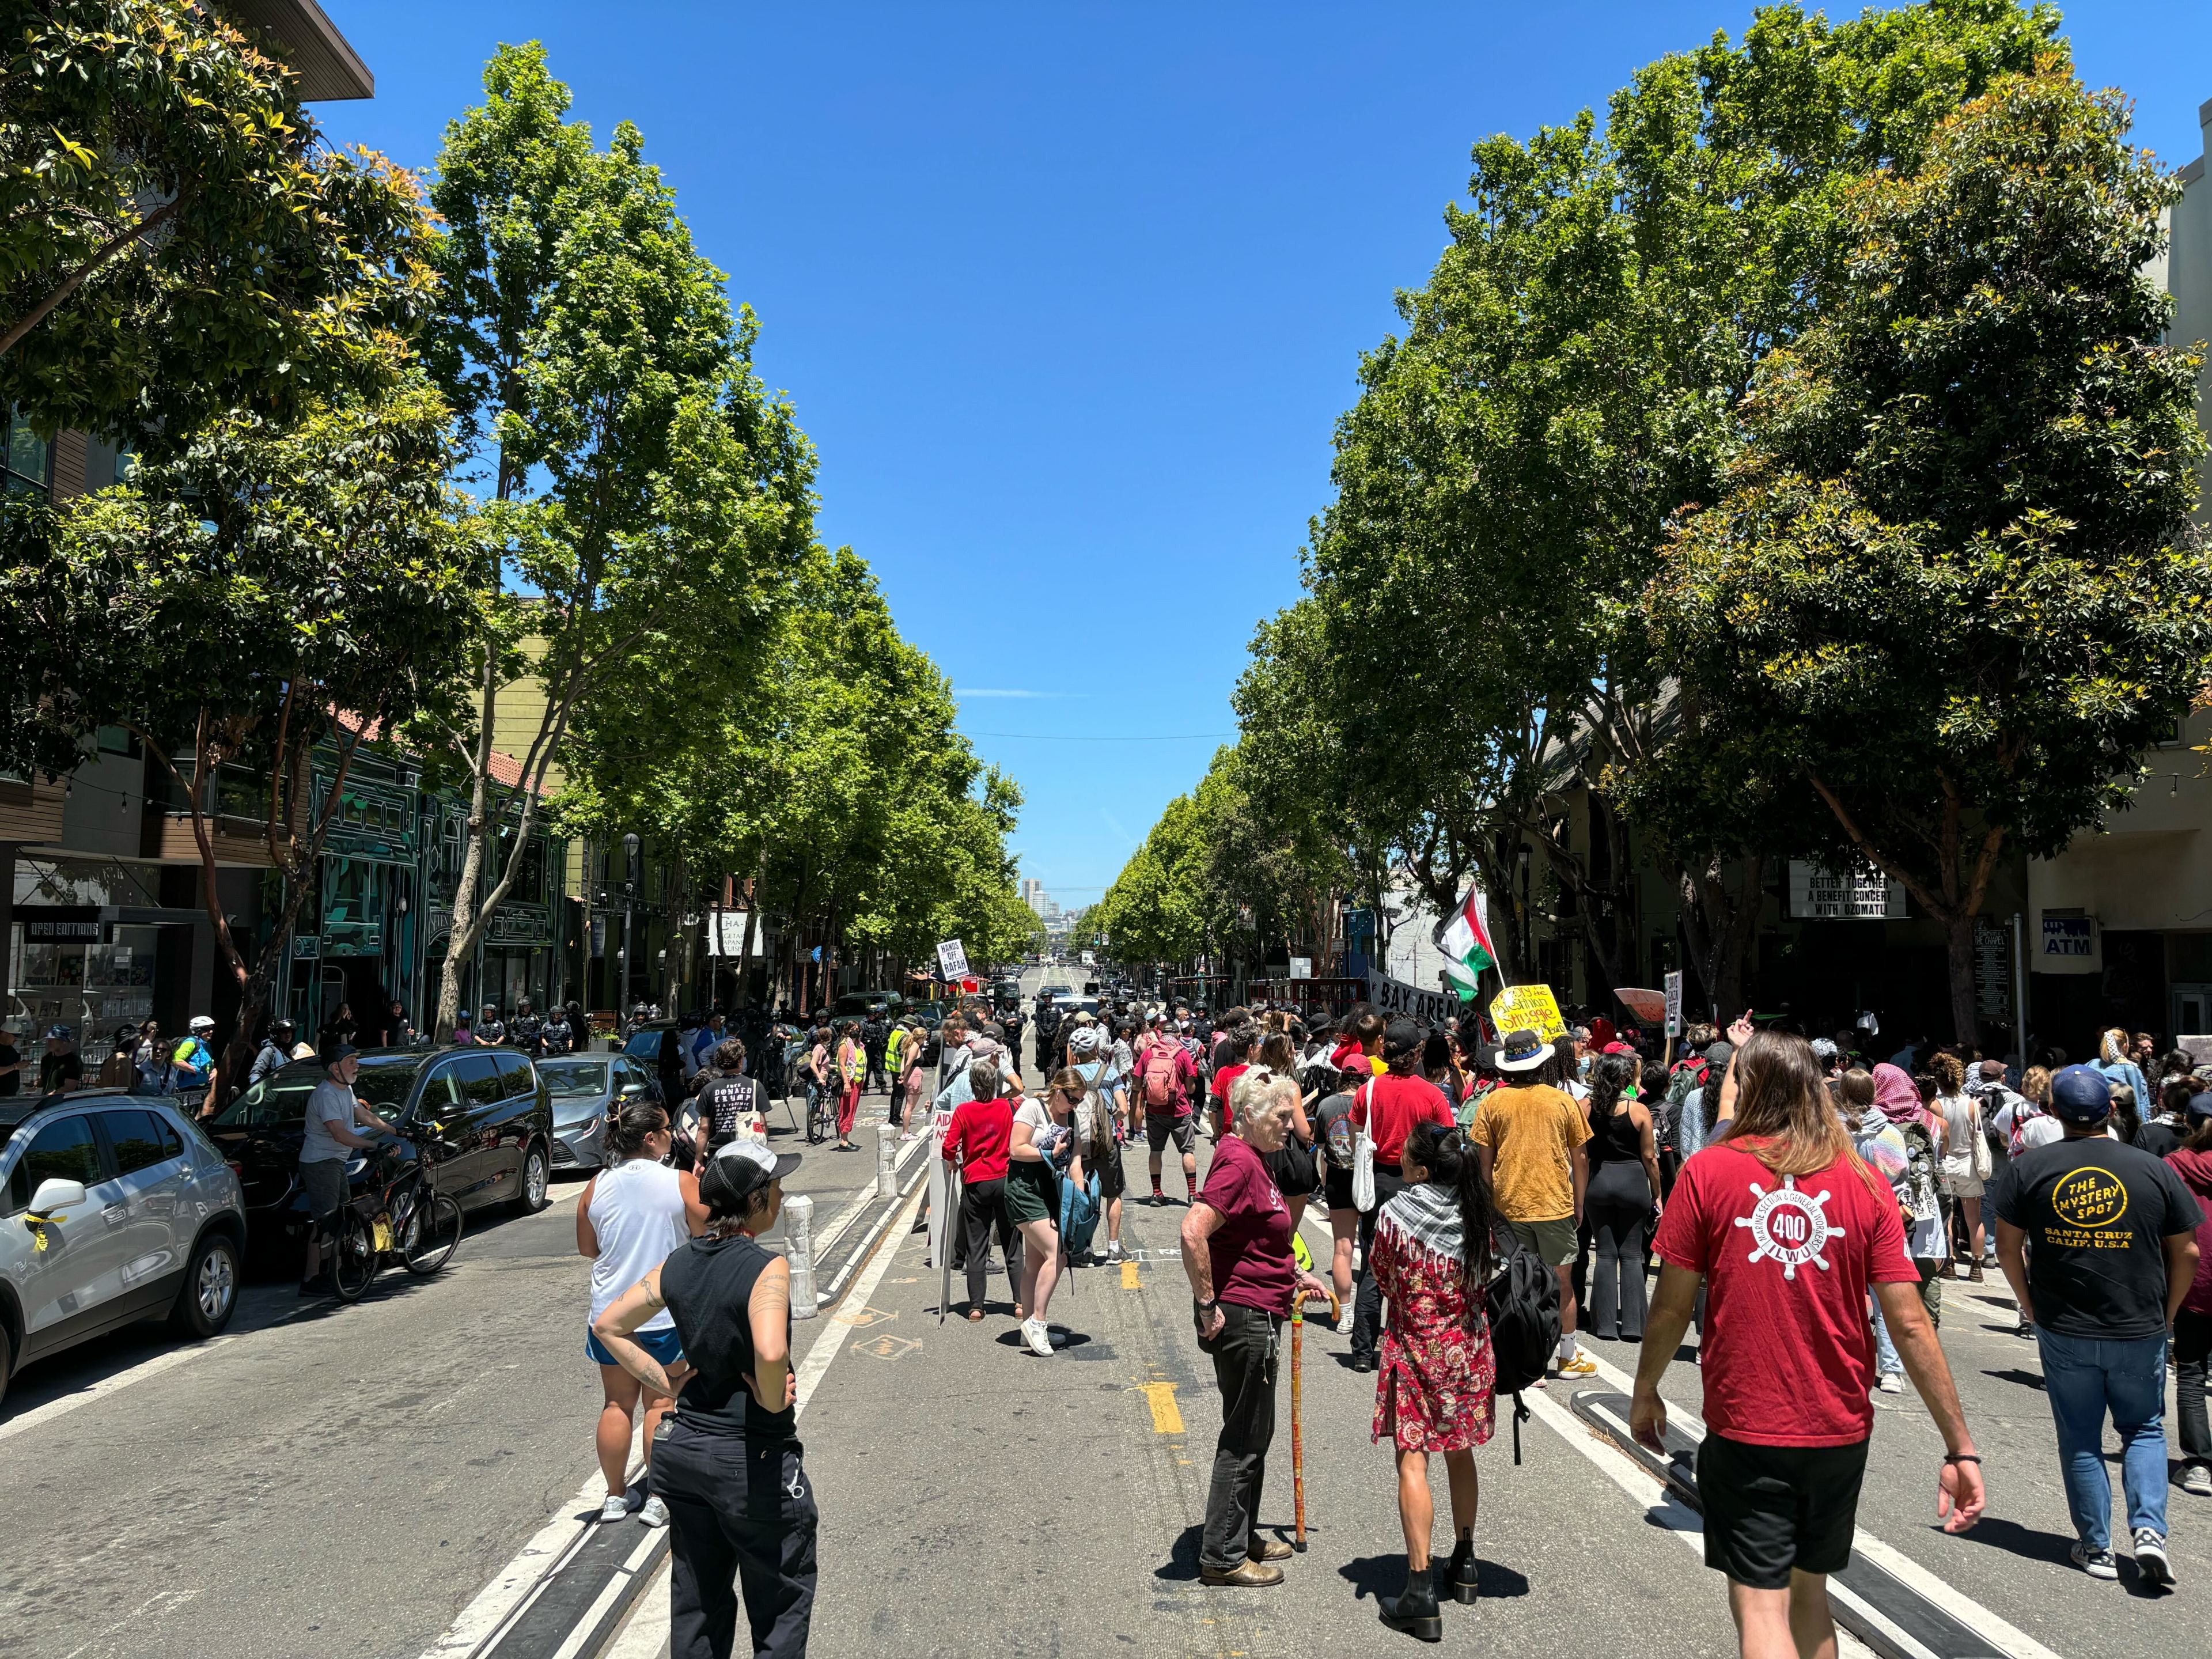 A diverse crowd of people is marching down a tree-lined street on a sunny day, some holding signs. The street is bustling with activity and surrounded by parked cars.